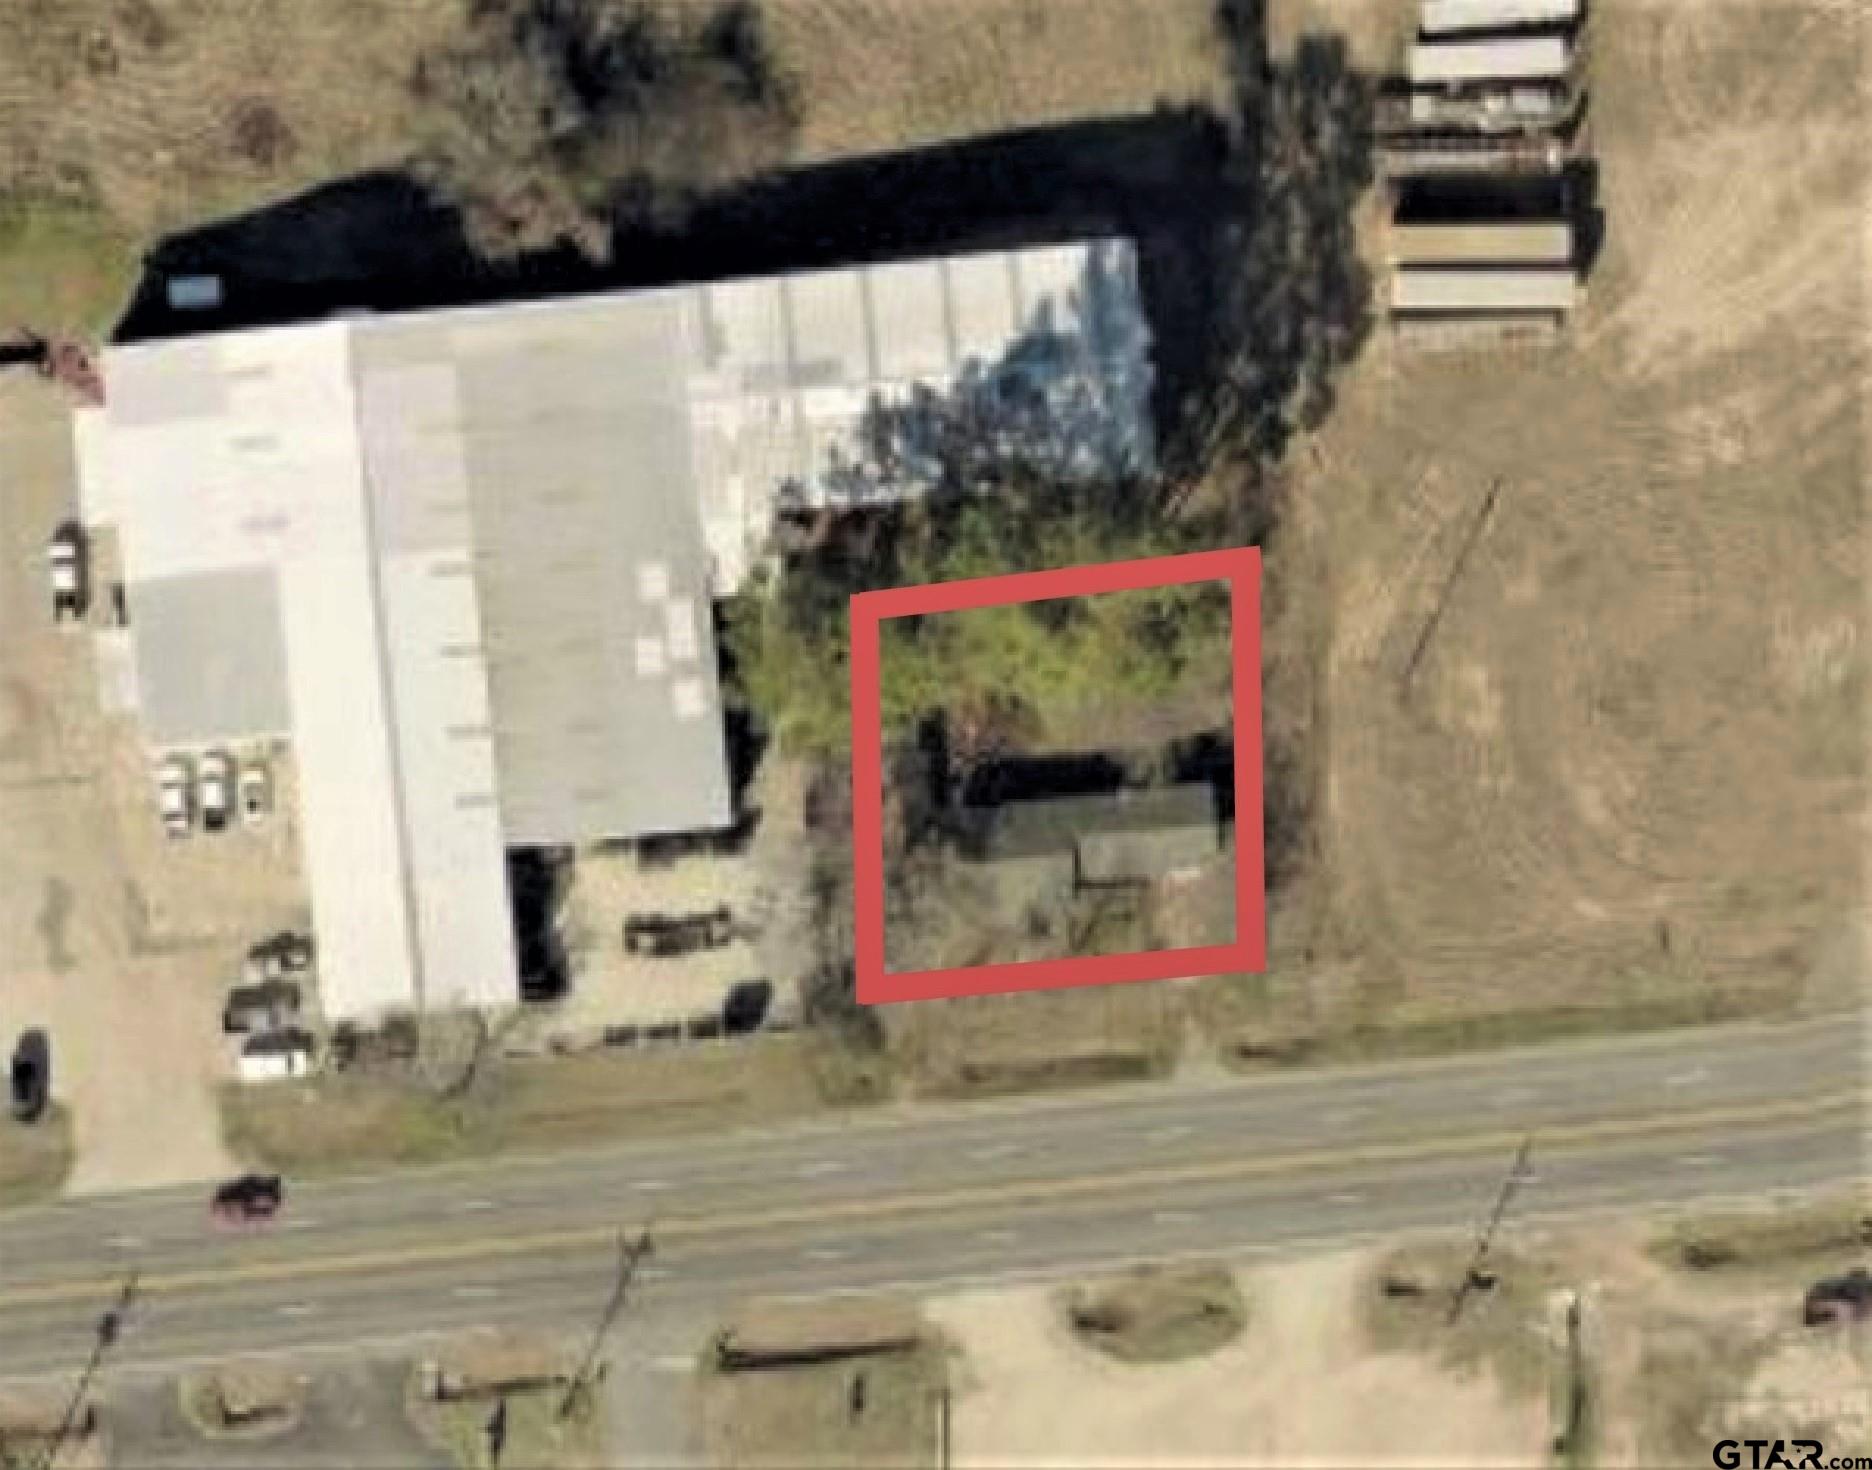 Great Commercial Location! Open your new business on this 0.25 acre lot at a high traffic street. The ideal spot surrounded by already successful businesses, an existing dwelling, & easy access to Interstate 30.